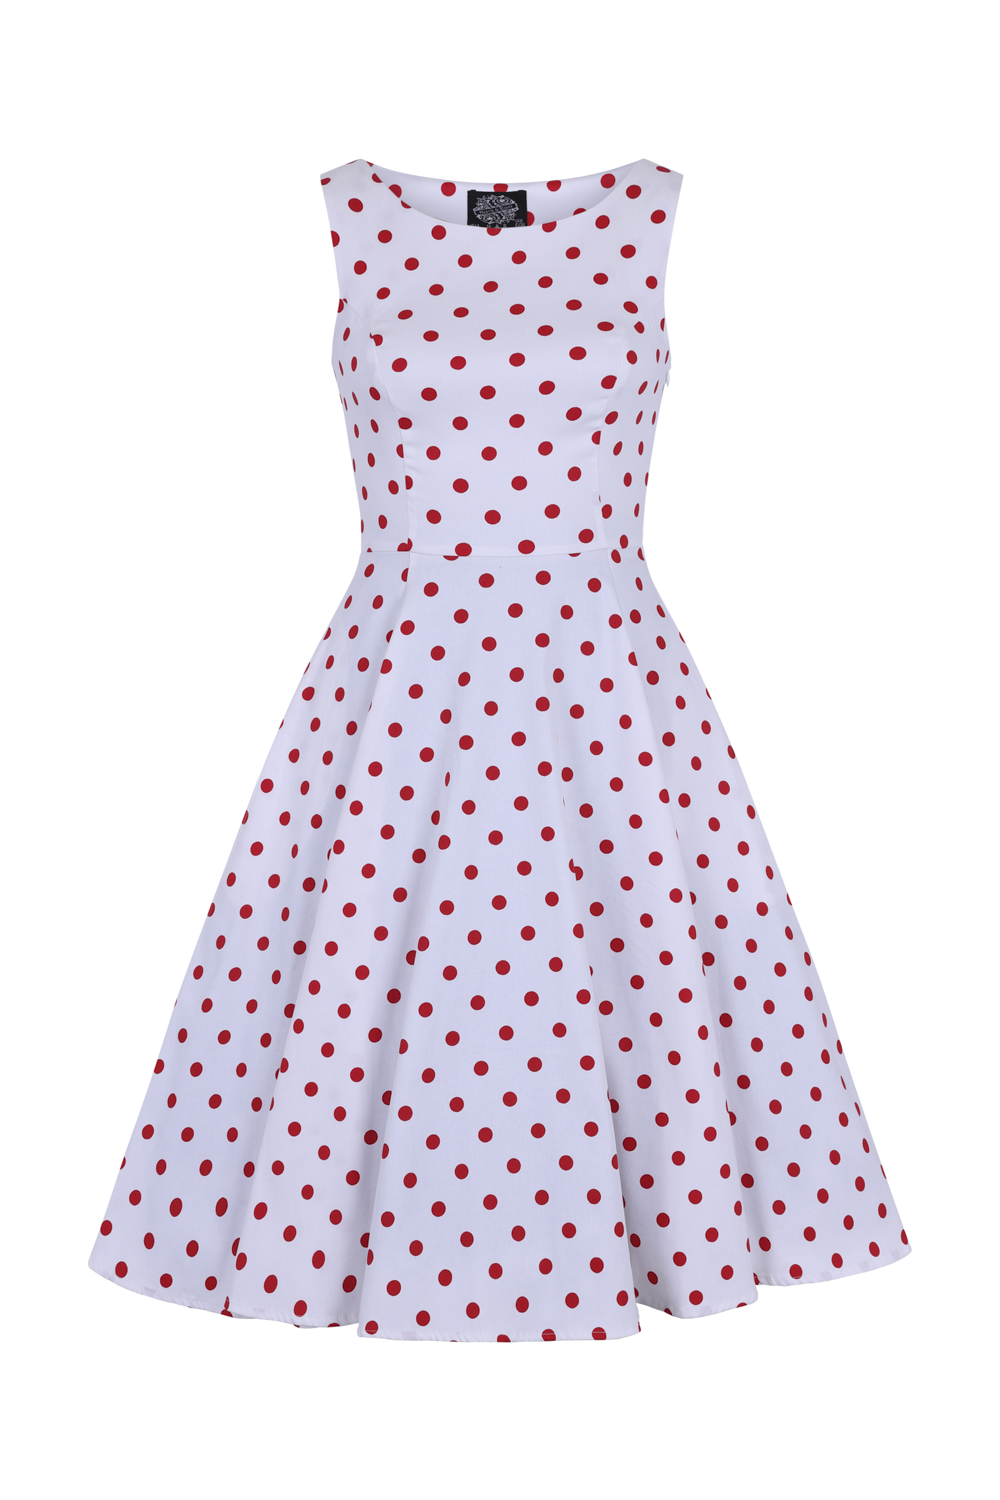 Cindy Polka Dot Swing Dress in White in White/Red - Hearts & Roses London